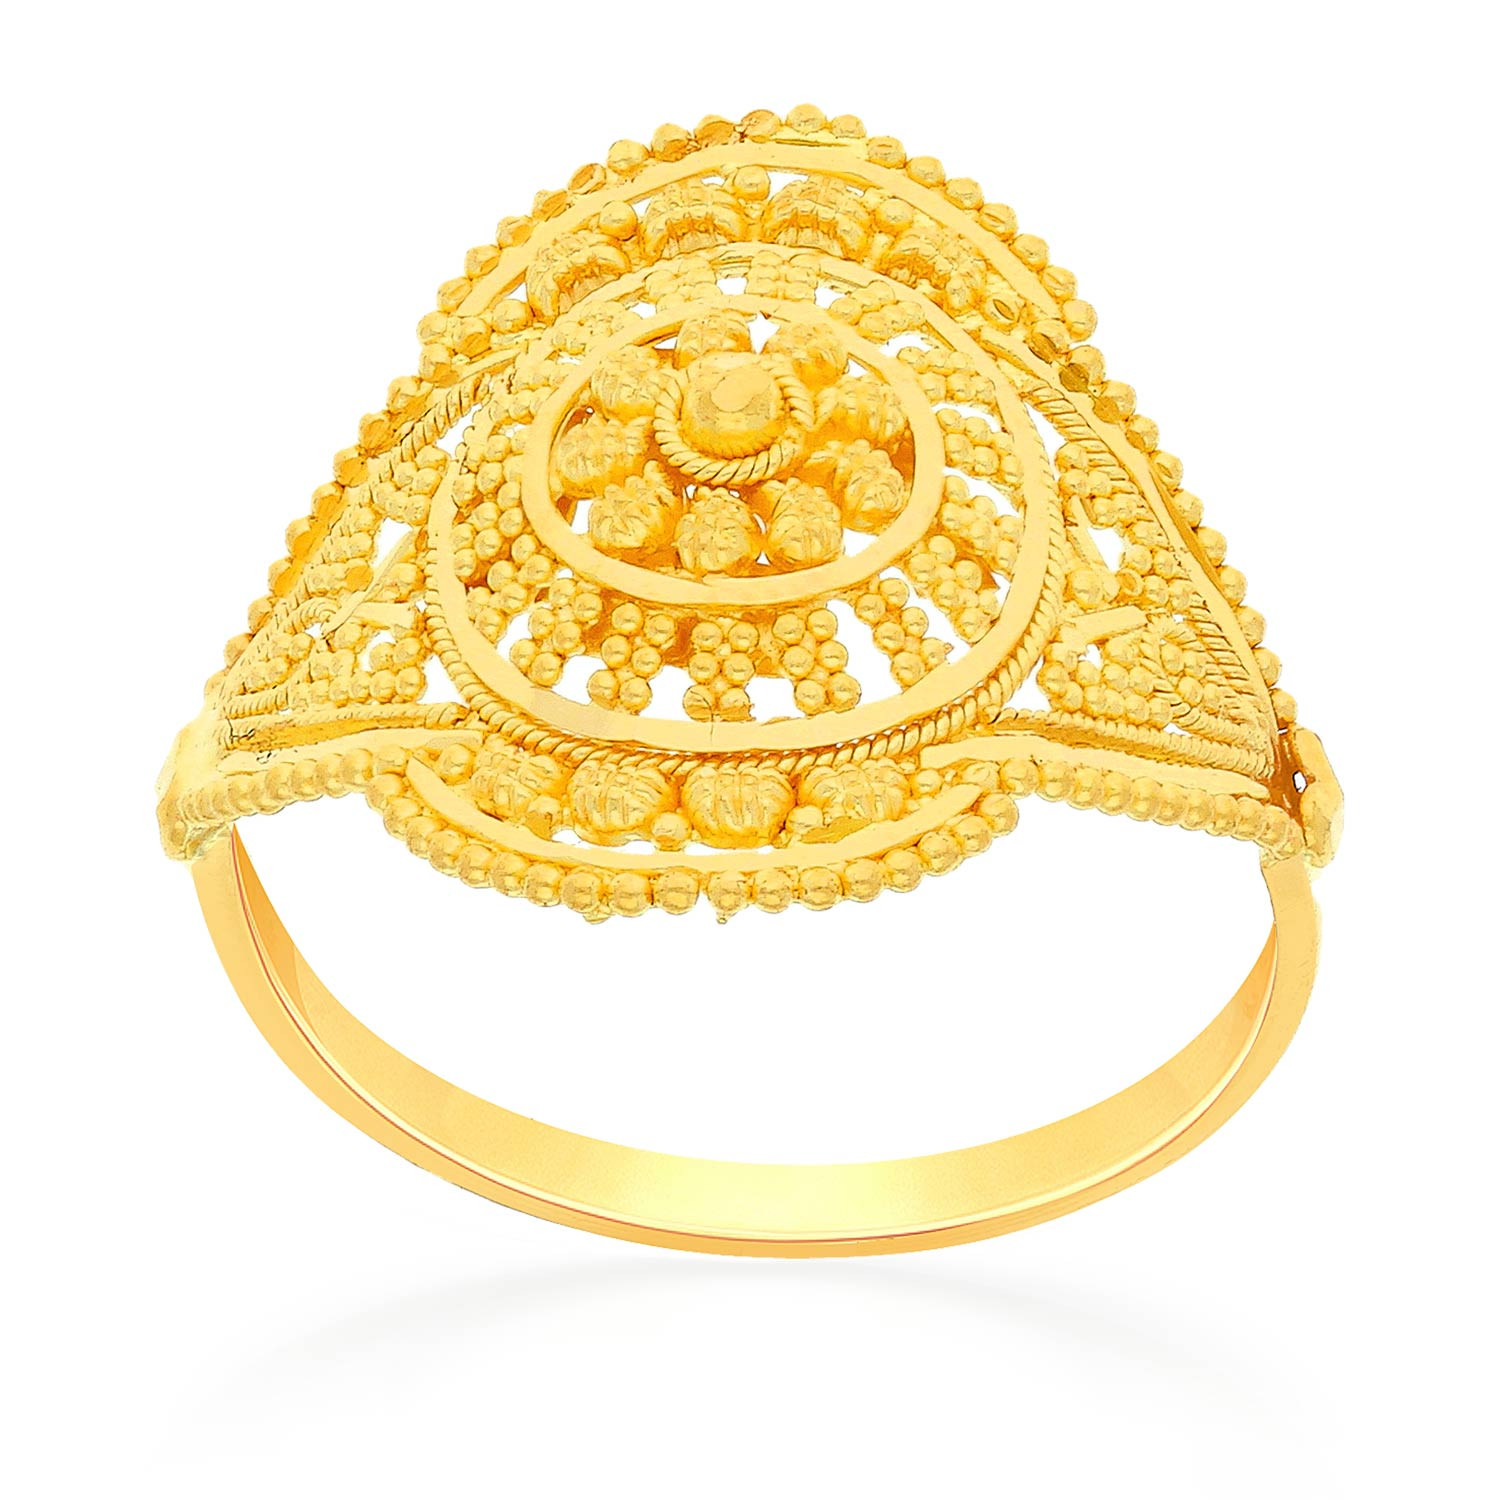 Buy Malabar Gold 22 KT Two Tone Gold Band Ring for Women Online